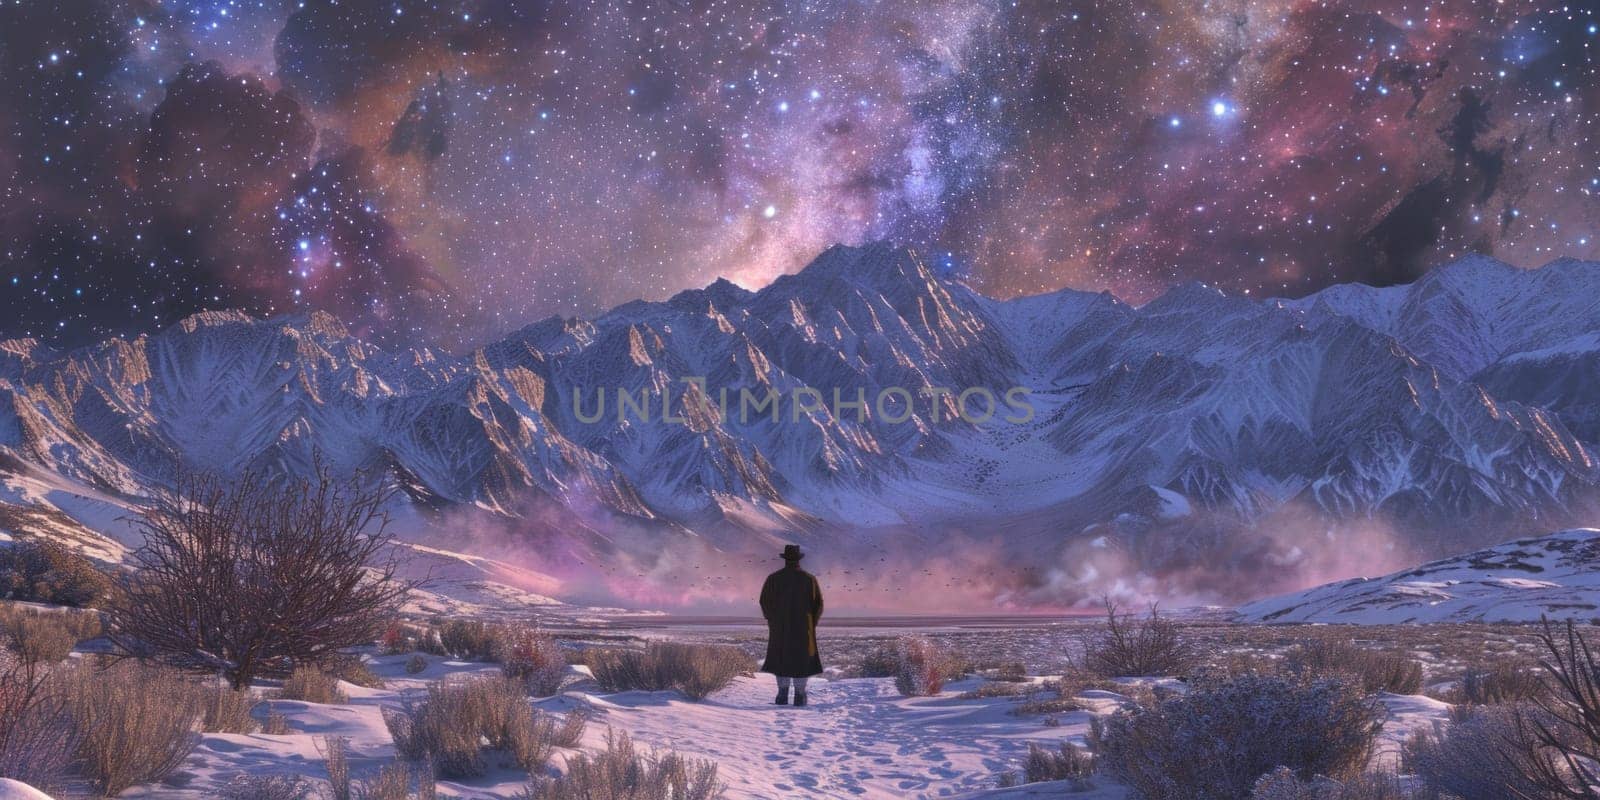 A solitary figure stands in the snow, gazing up at the starry night sky with a sense of wonder and contemplation.